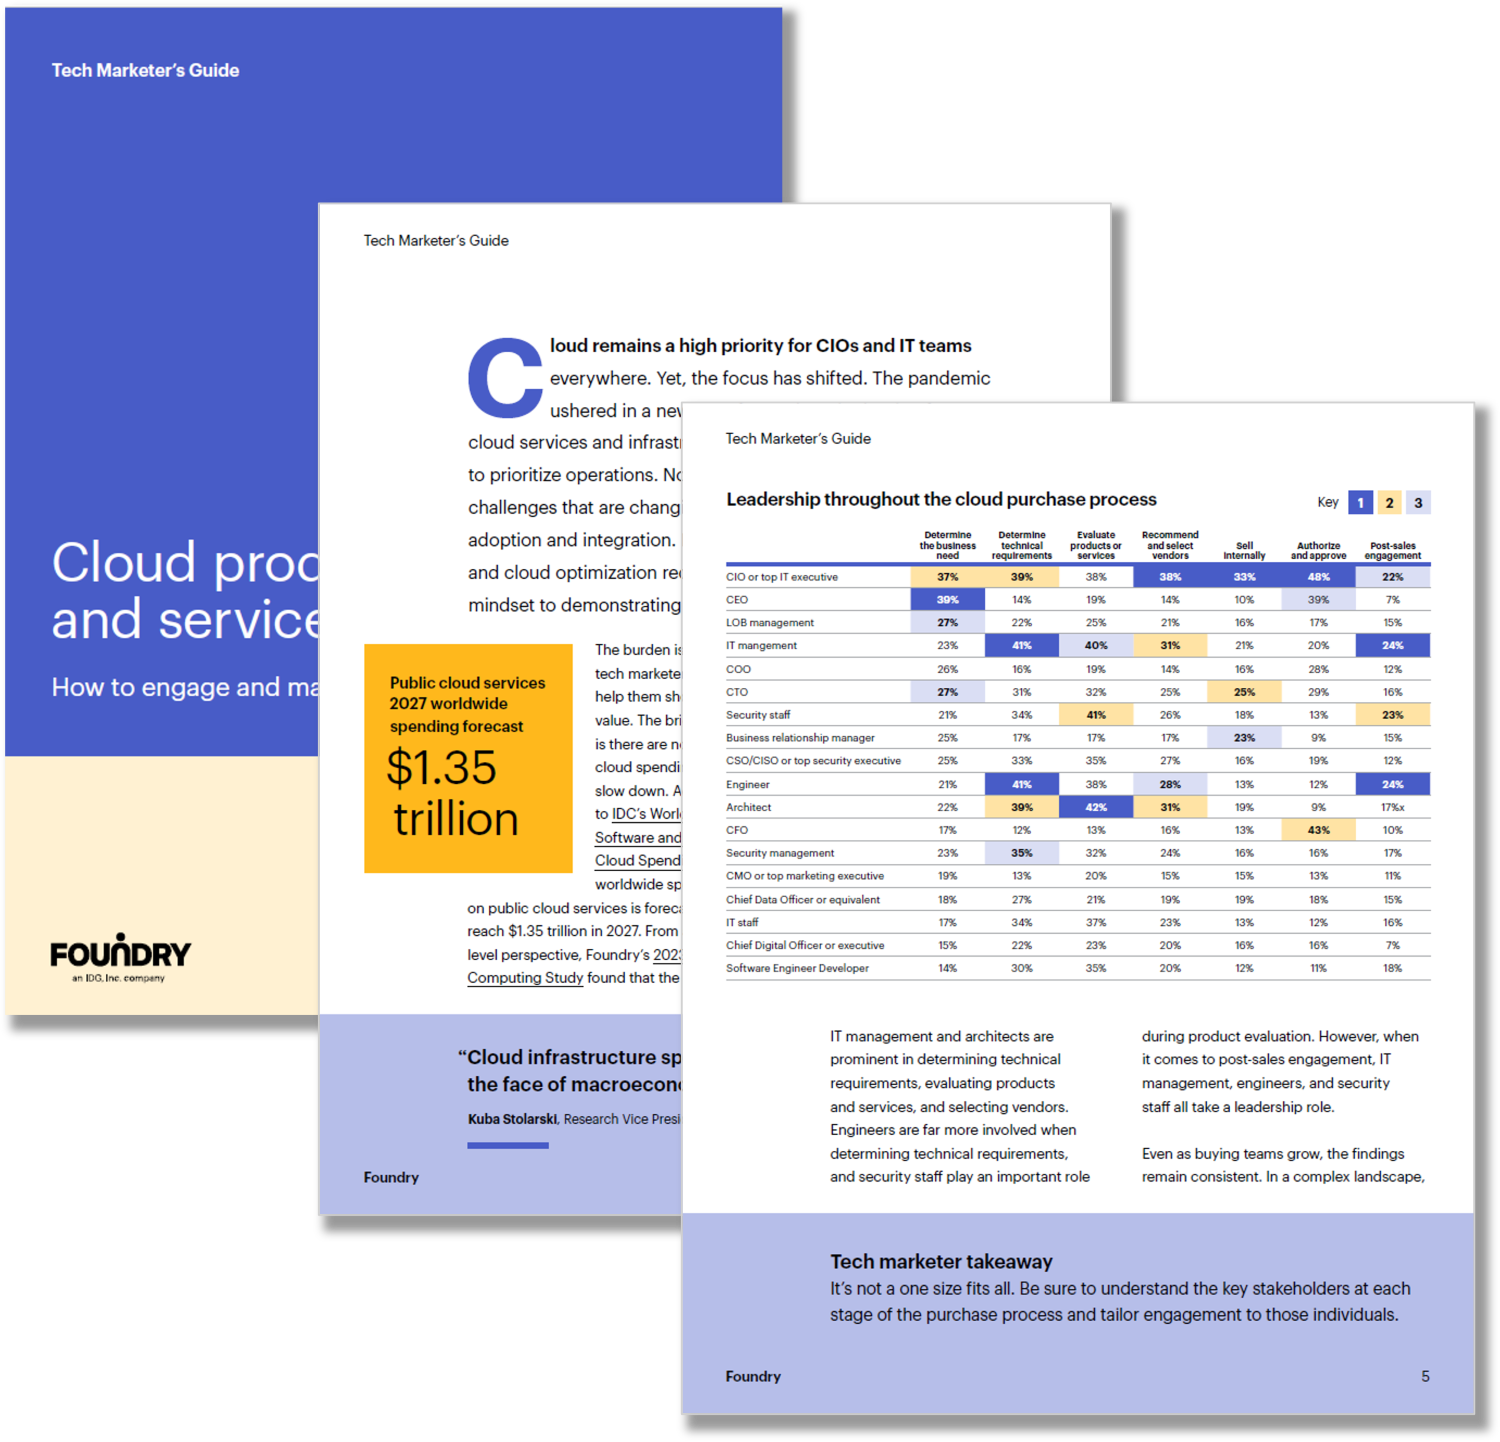 Cloud tech marketers guide image_smaller